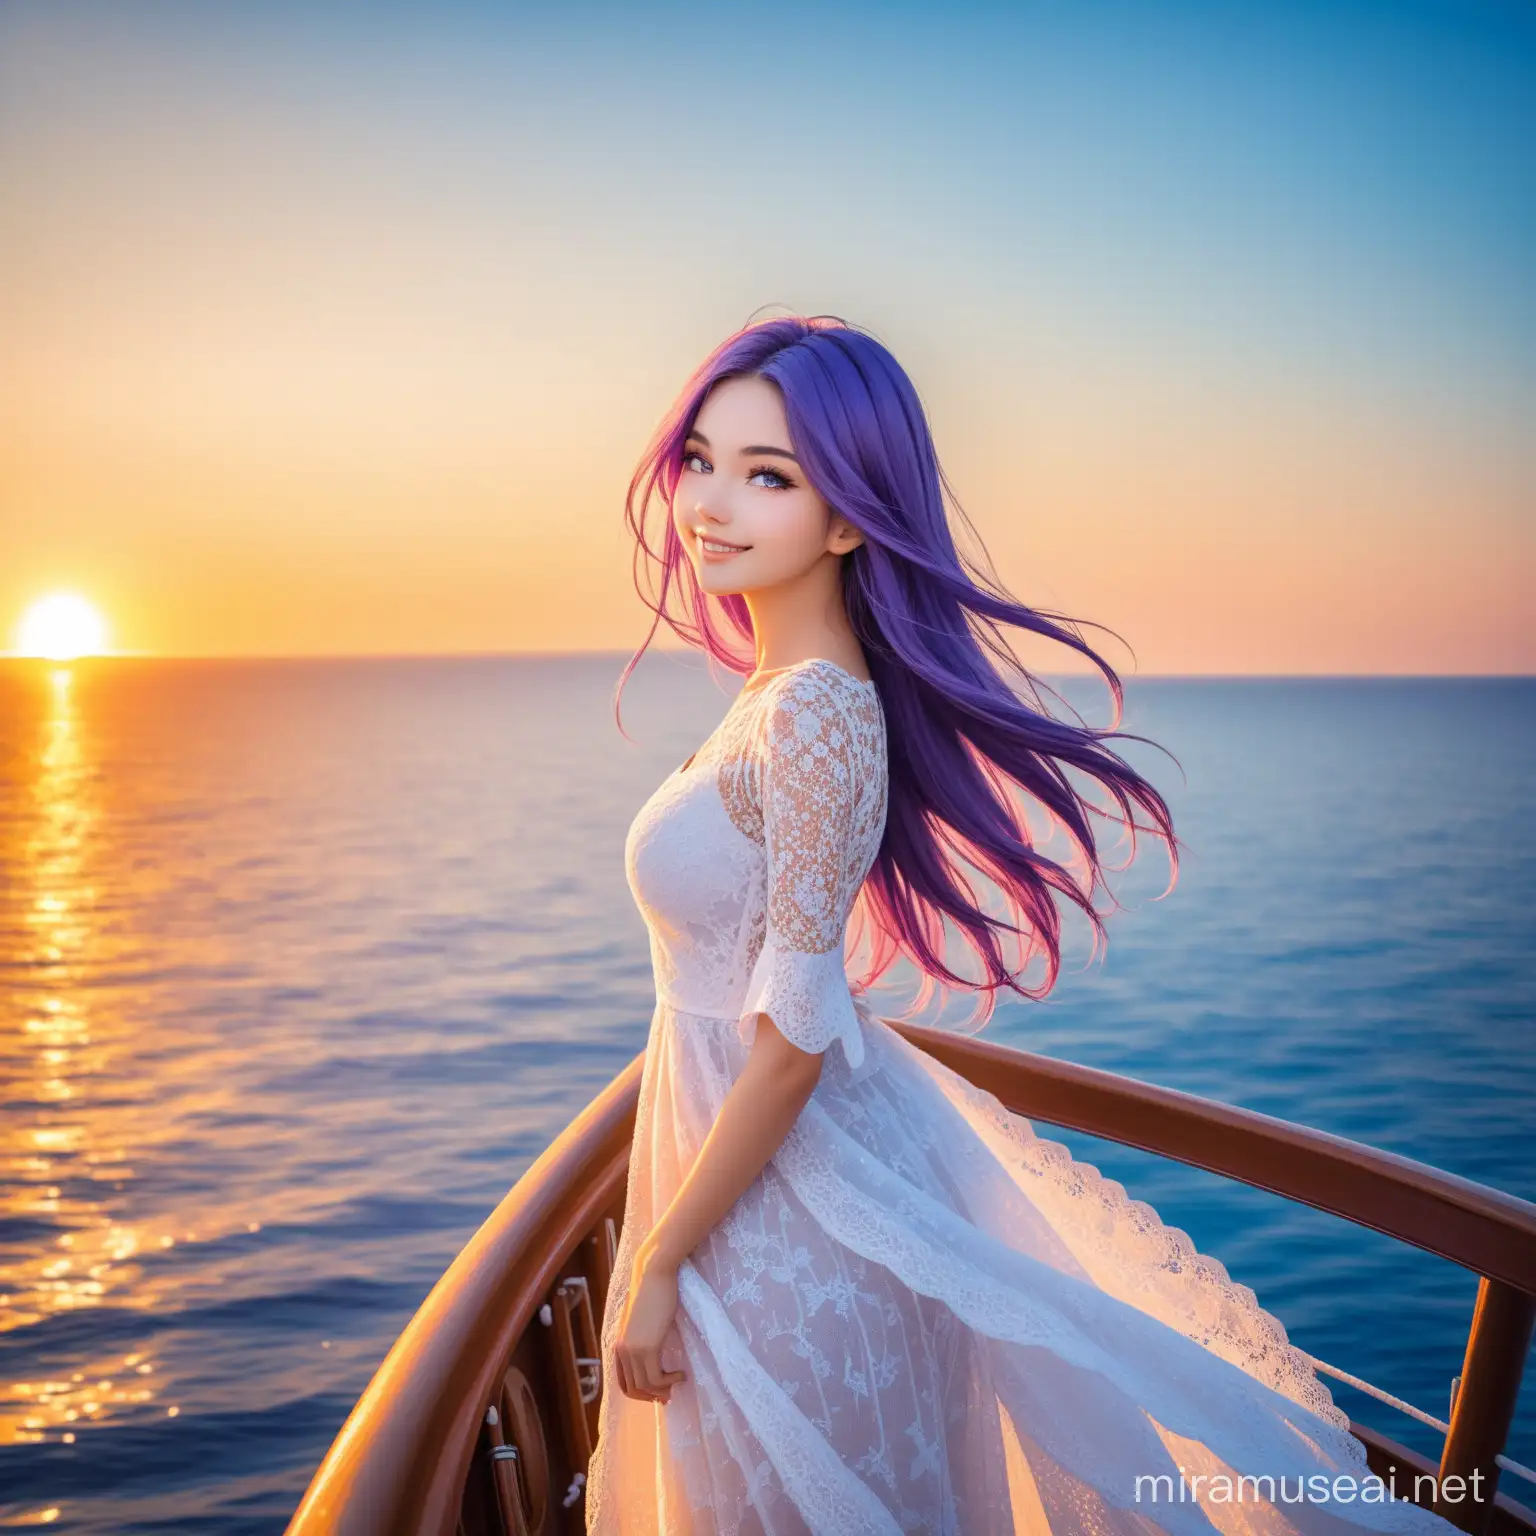 SUPER beautiful girl with long purple hair in lace clothes standing on the bow of a beautiful ship, smiling and looking into the distance, sunrise, warmth, blue sea, blue sky